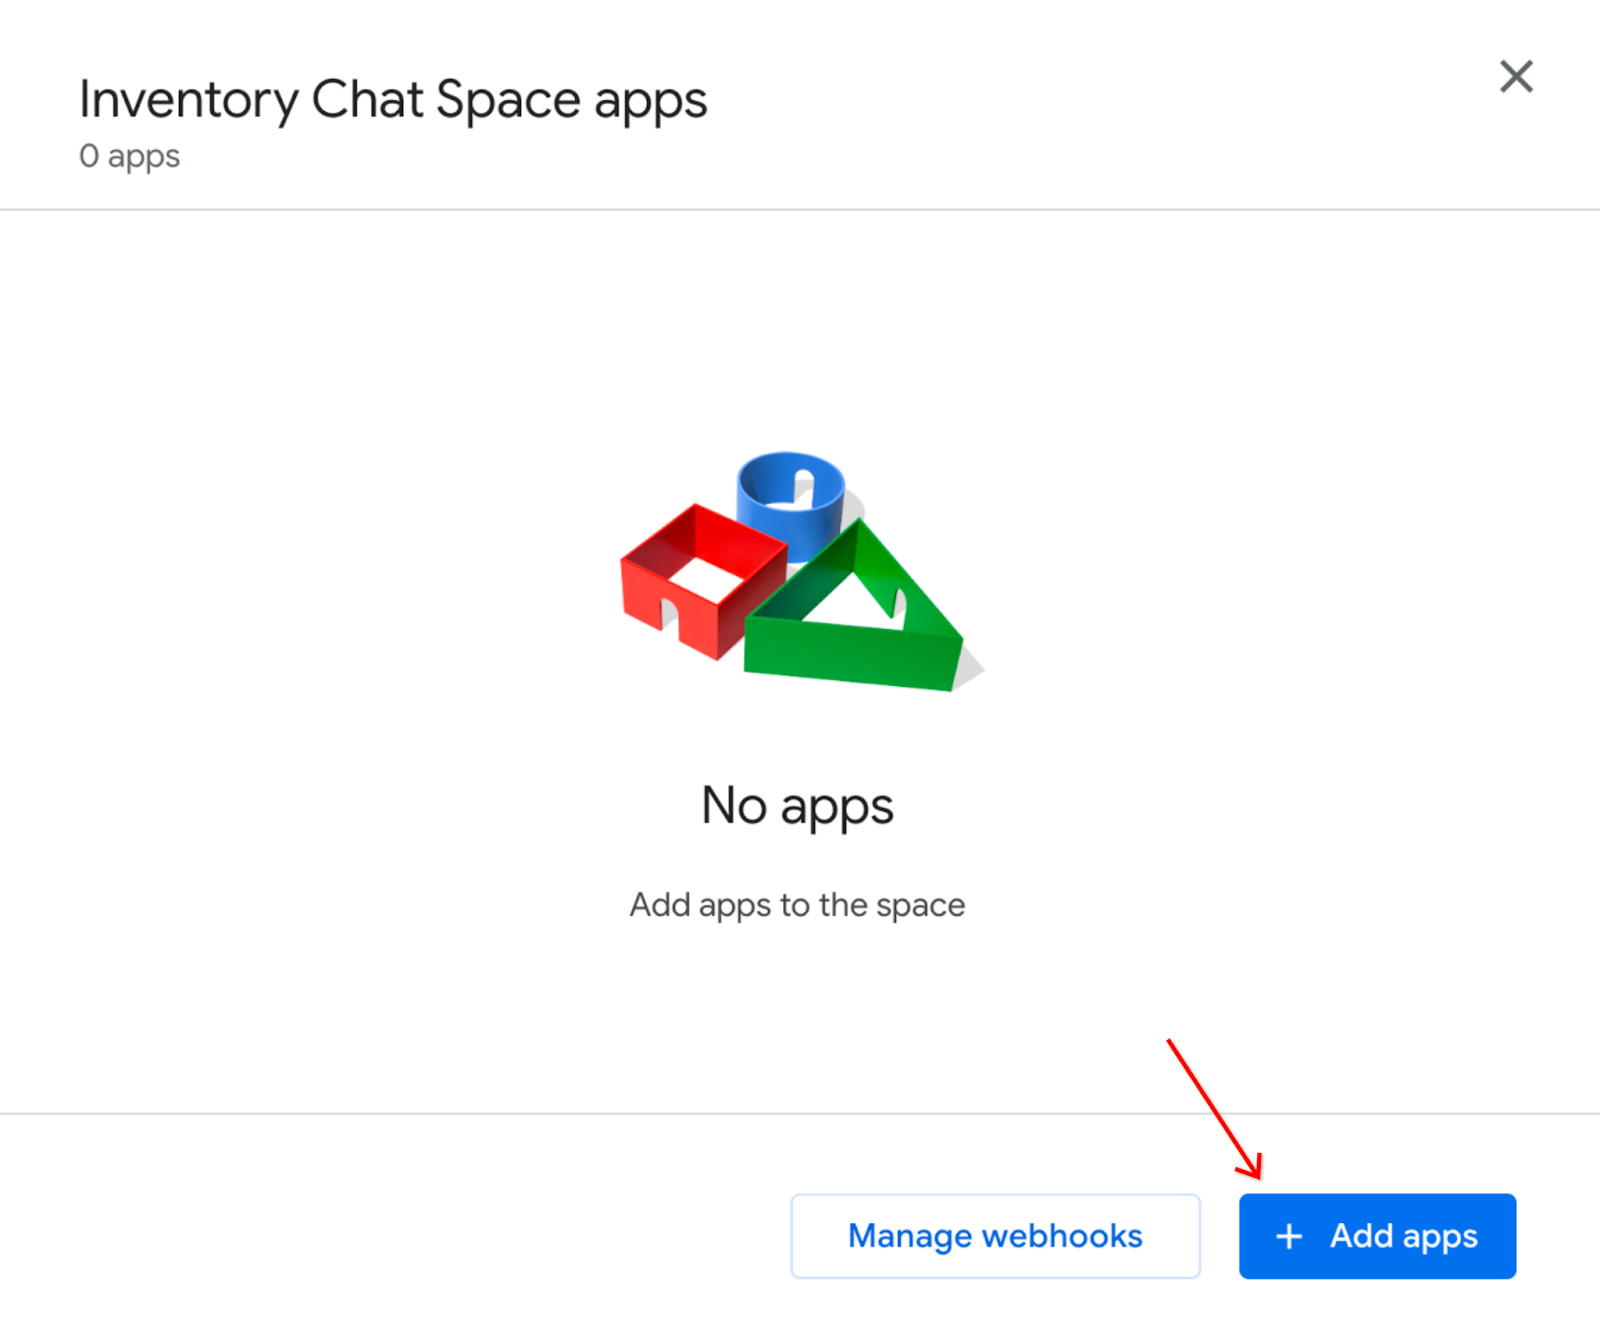 Add apps to Inventory Chat Space.